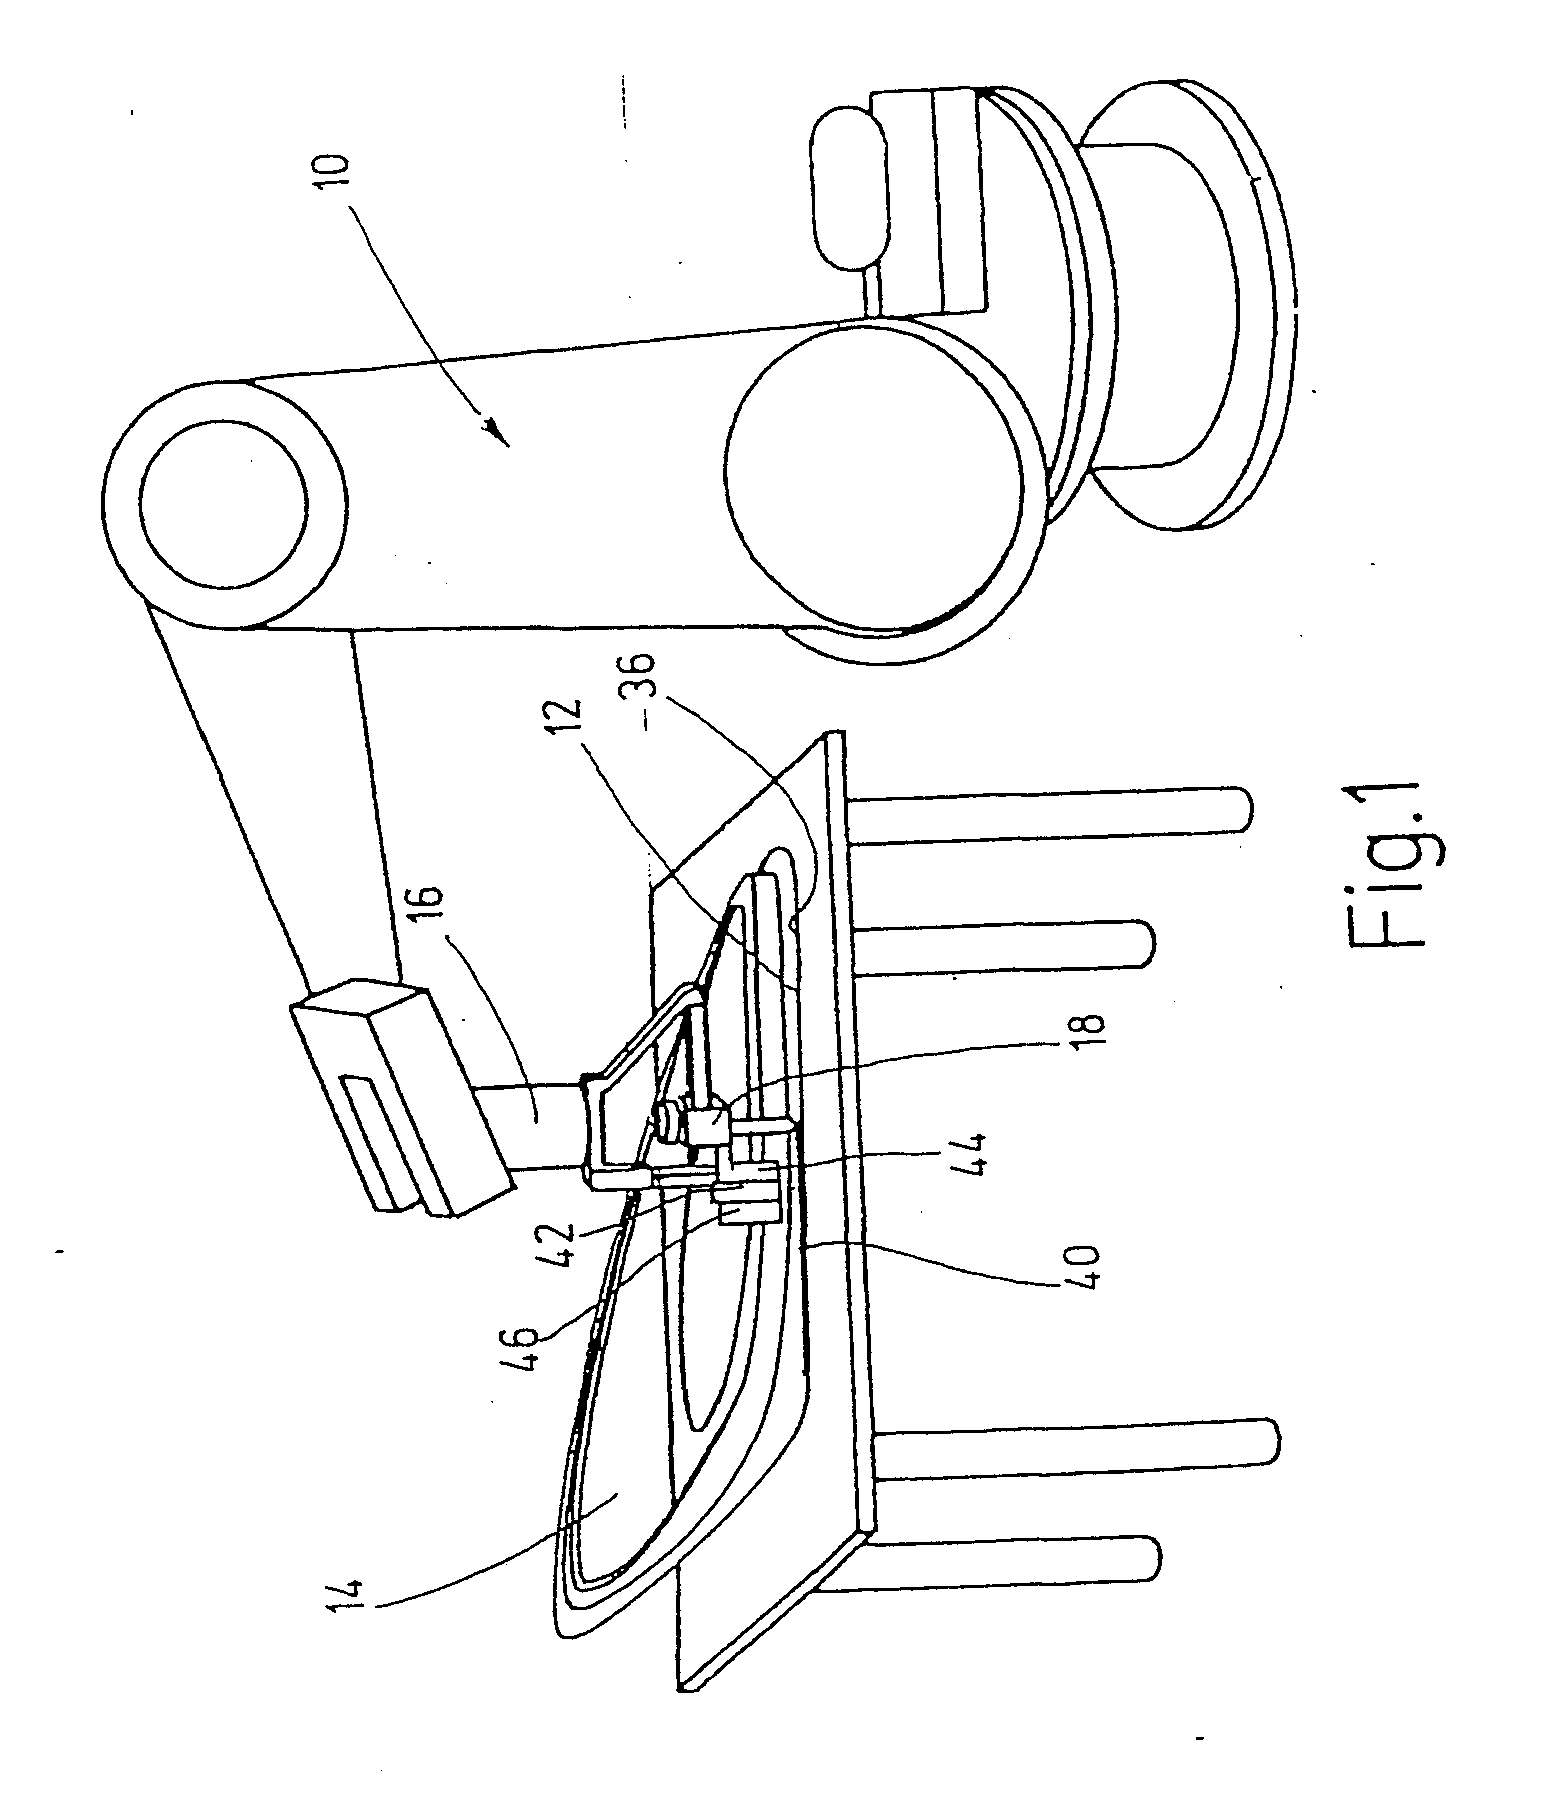 Device for applying adhesive to a workpiece